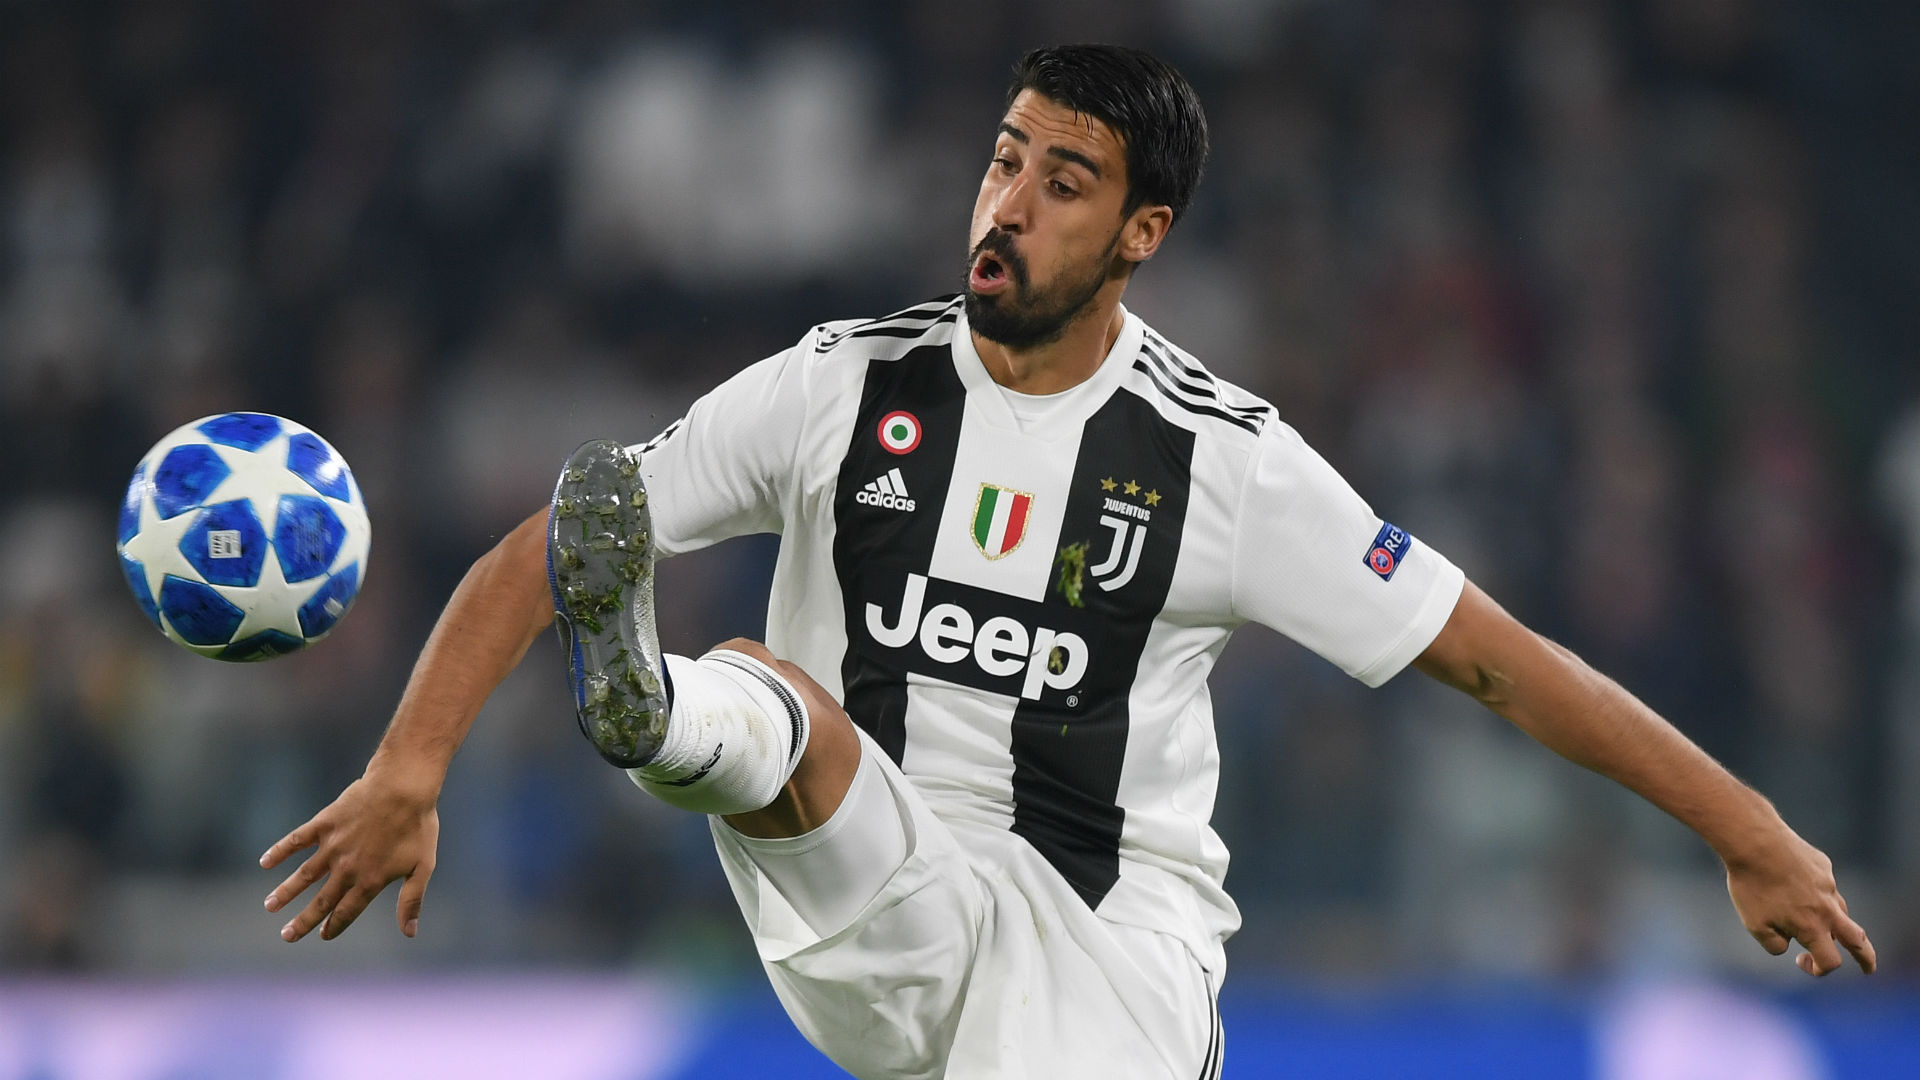 Juventus have been handed a boost with the news that Sami Khedira can return to full training following a heart problem.